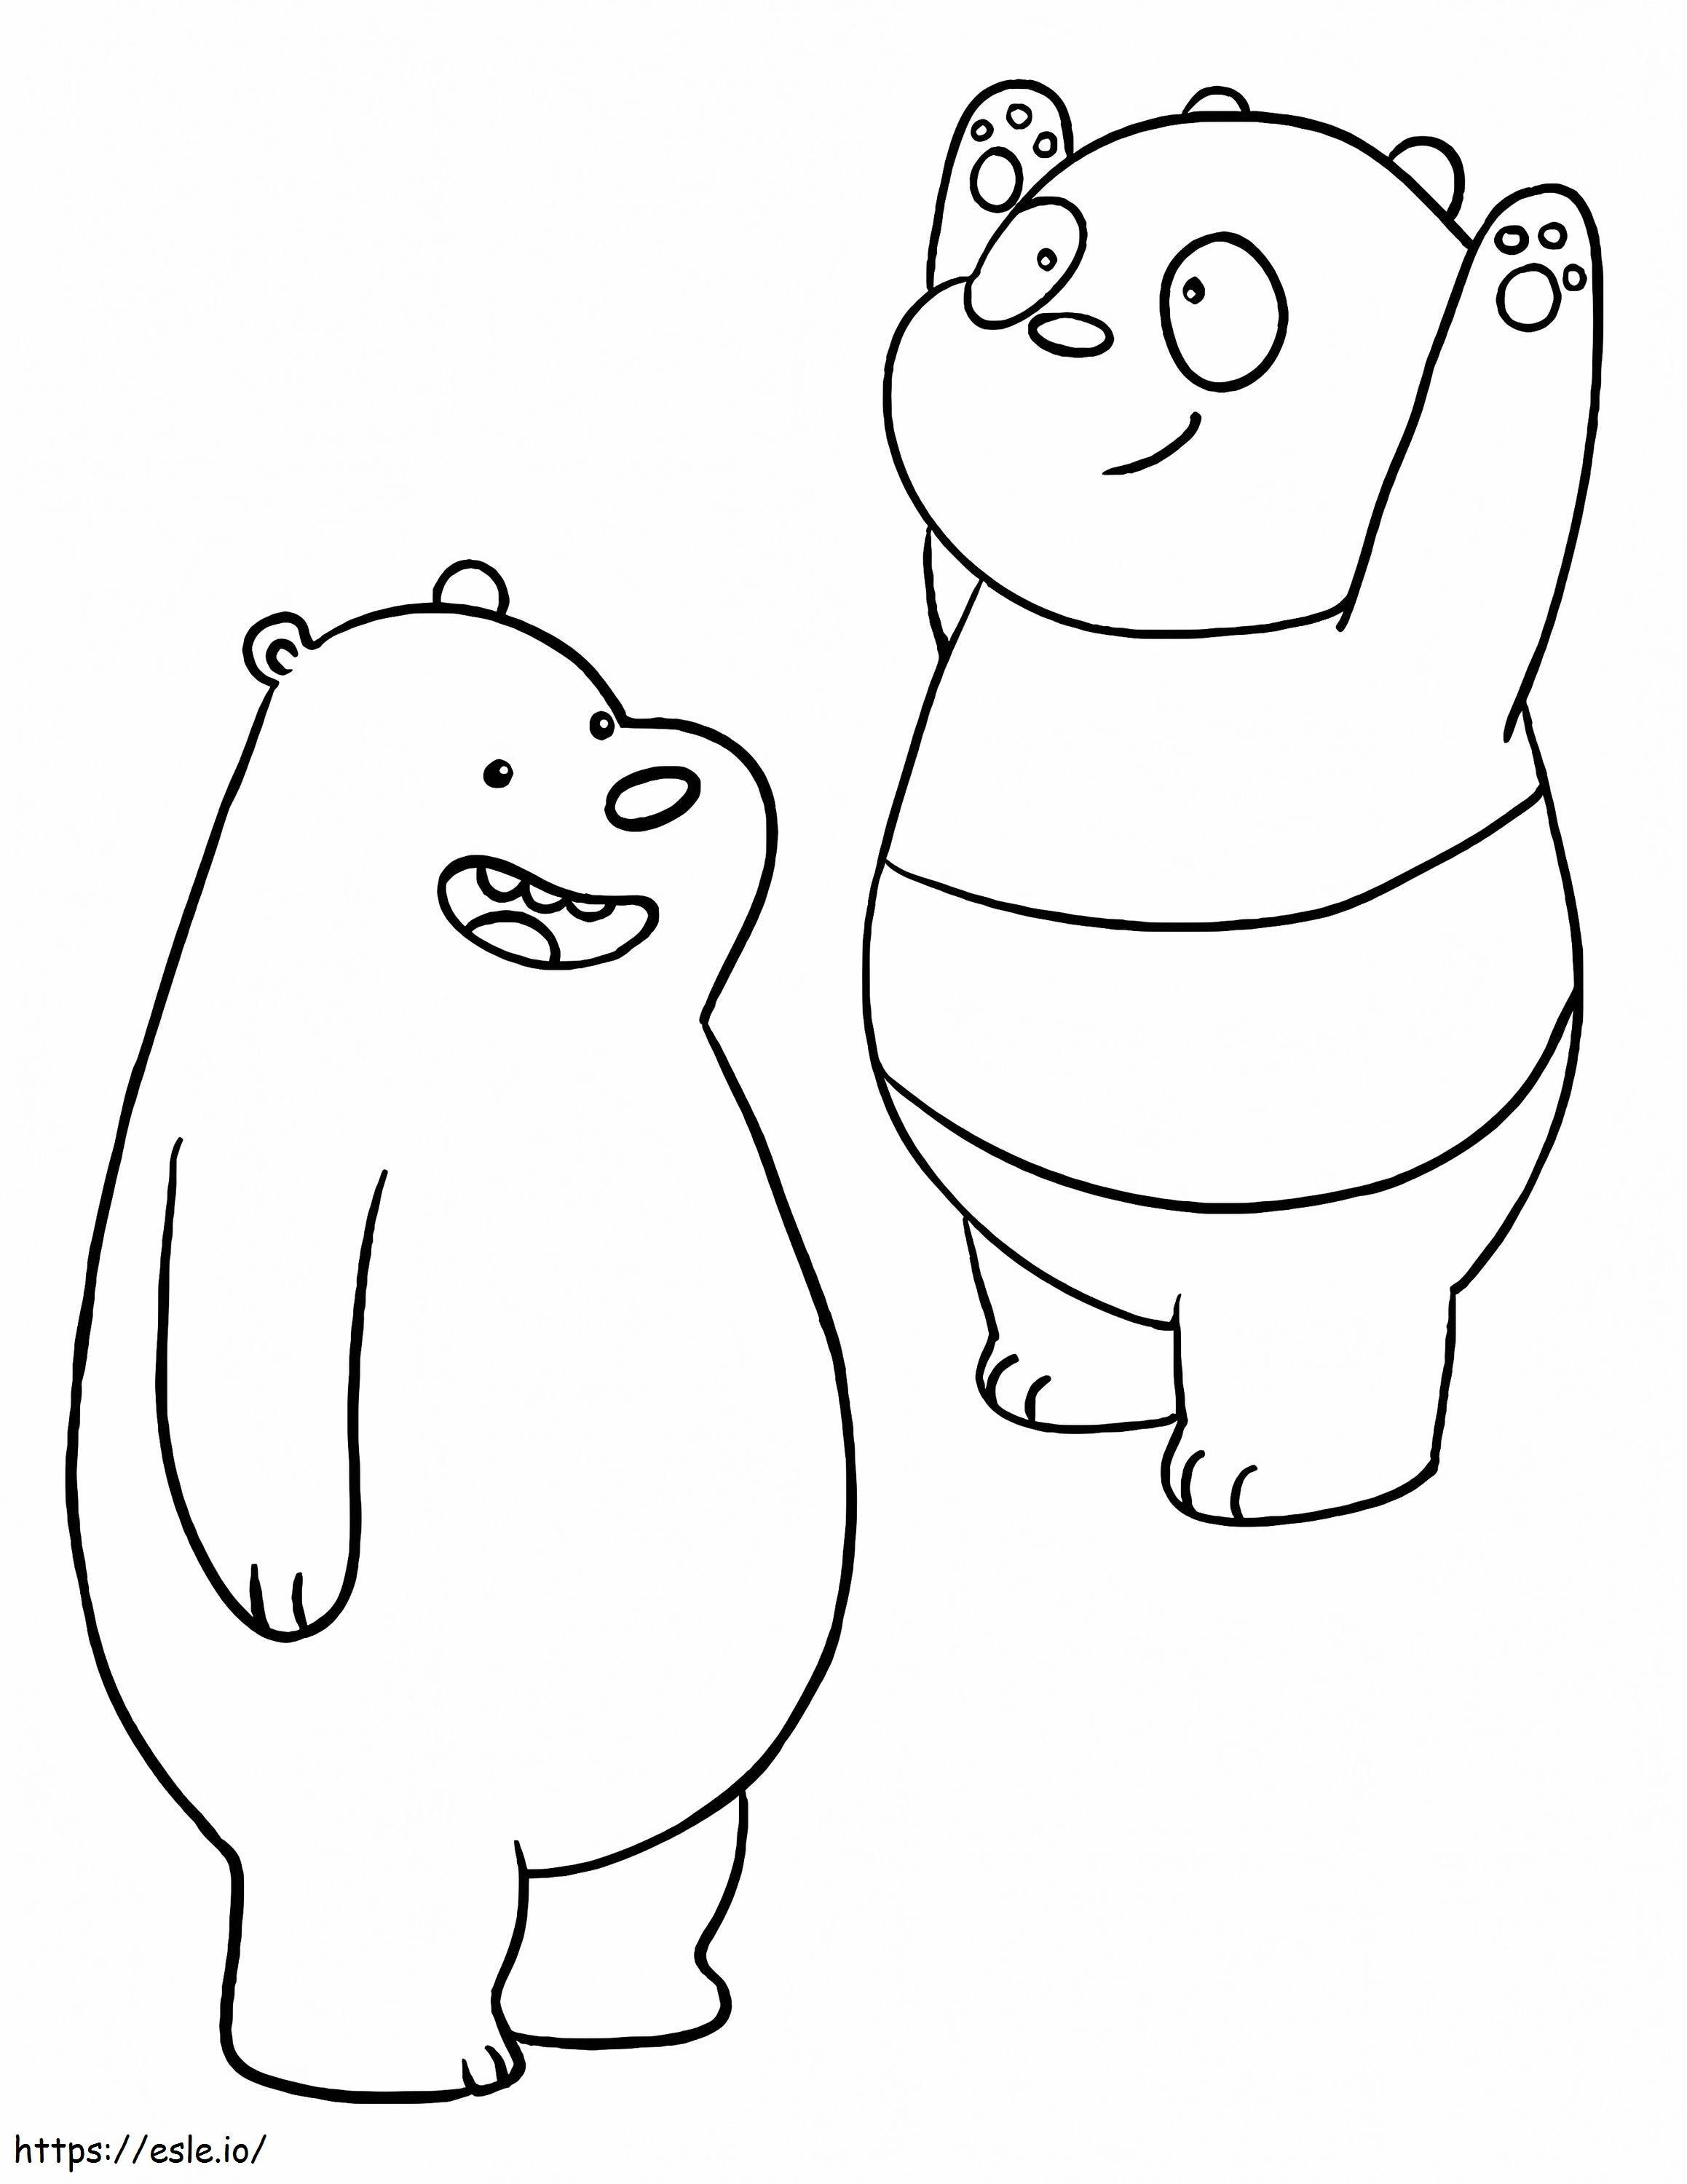 1560476156 Grizzly And Panda A4 coloring page